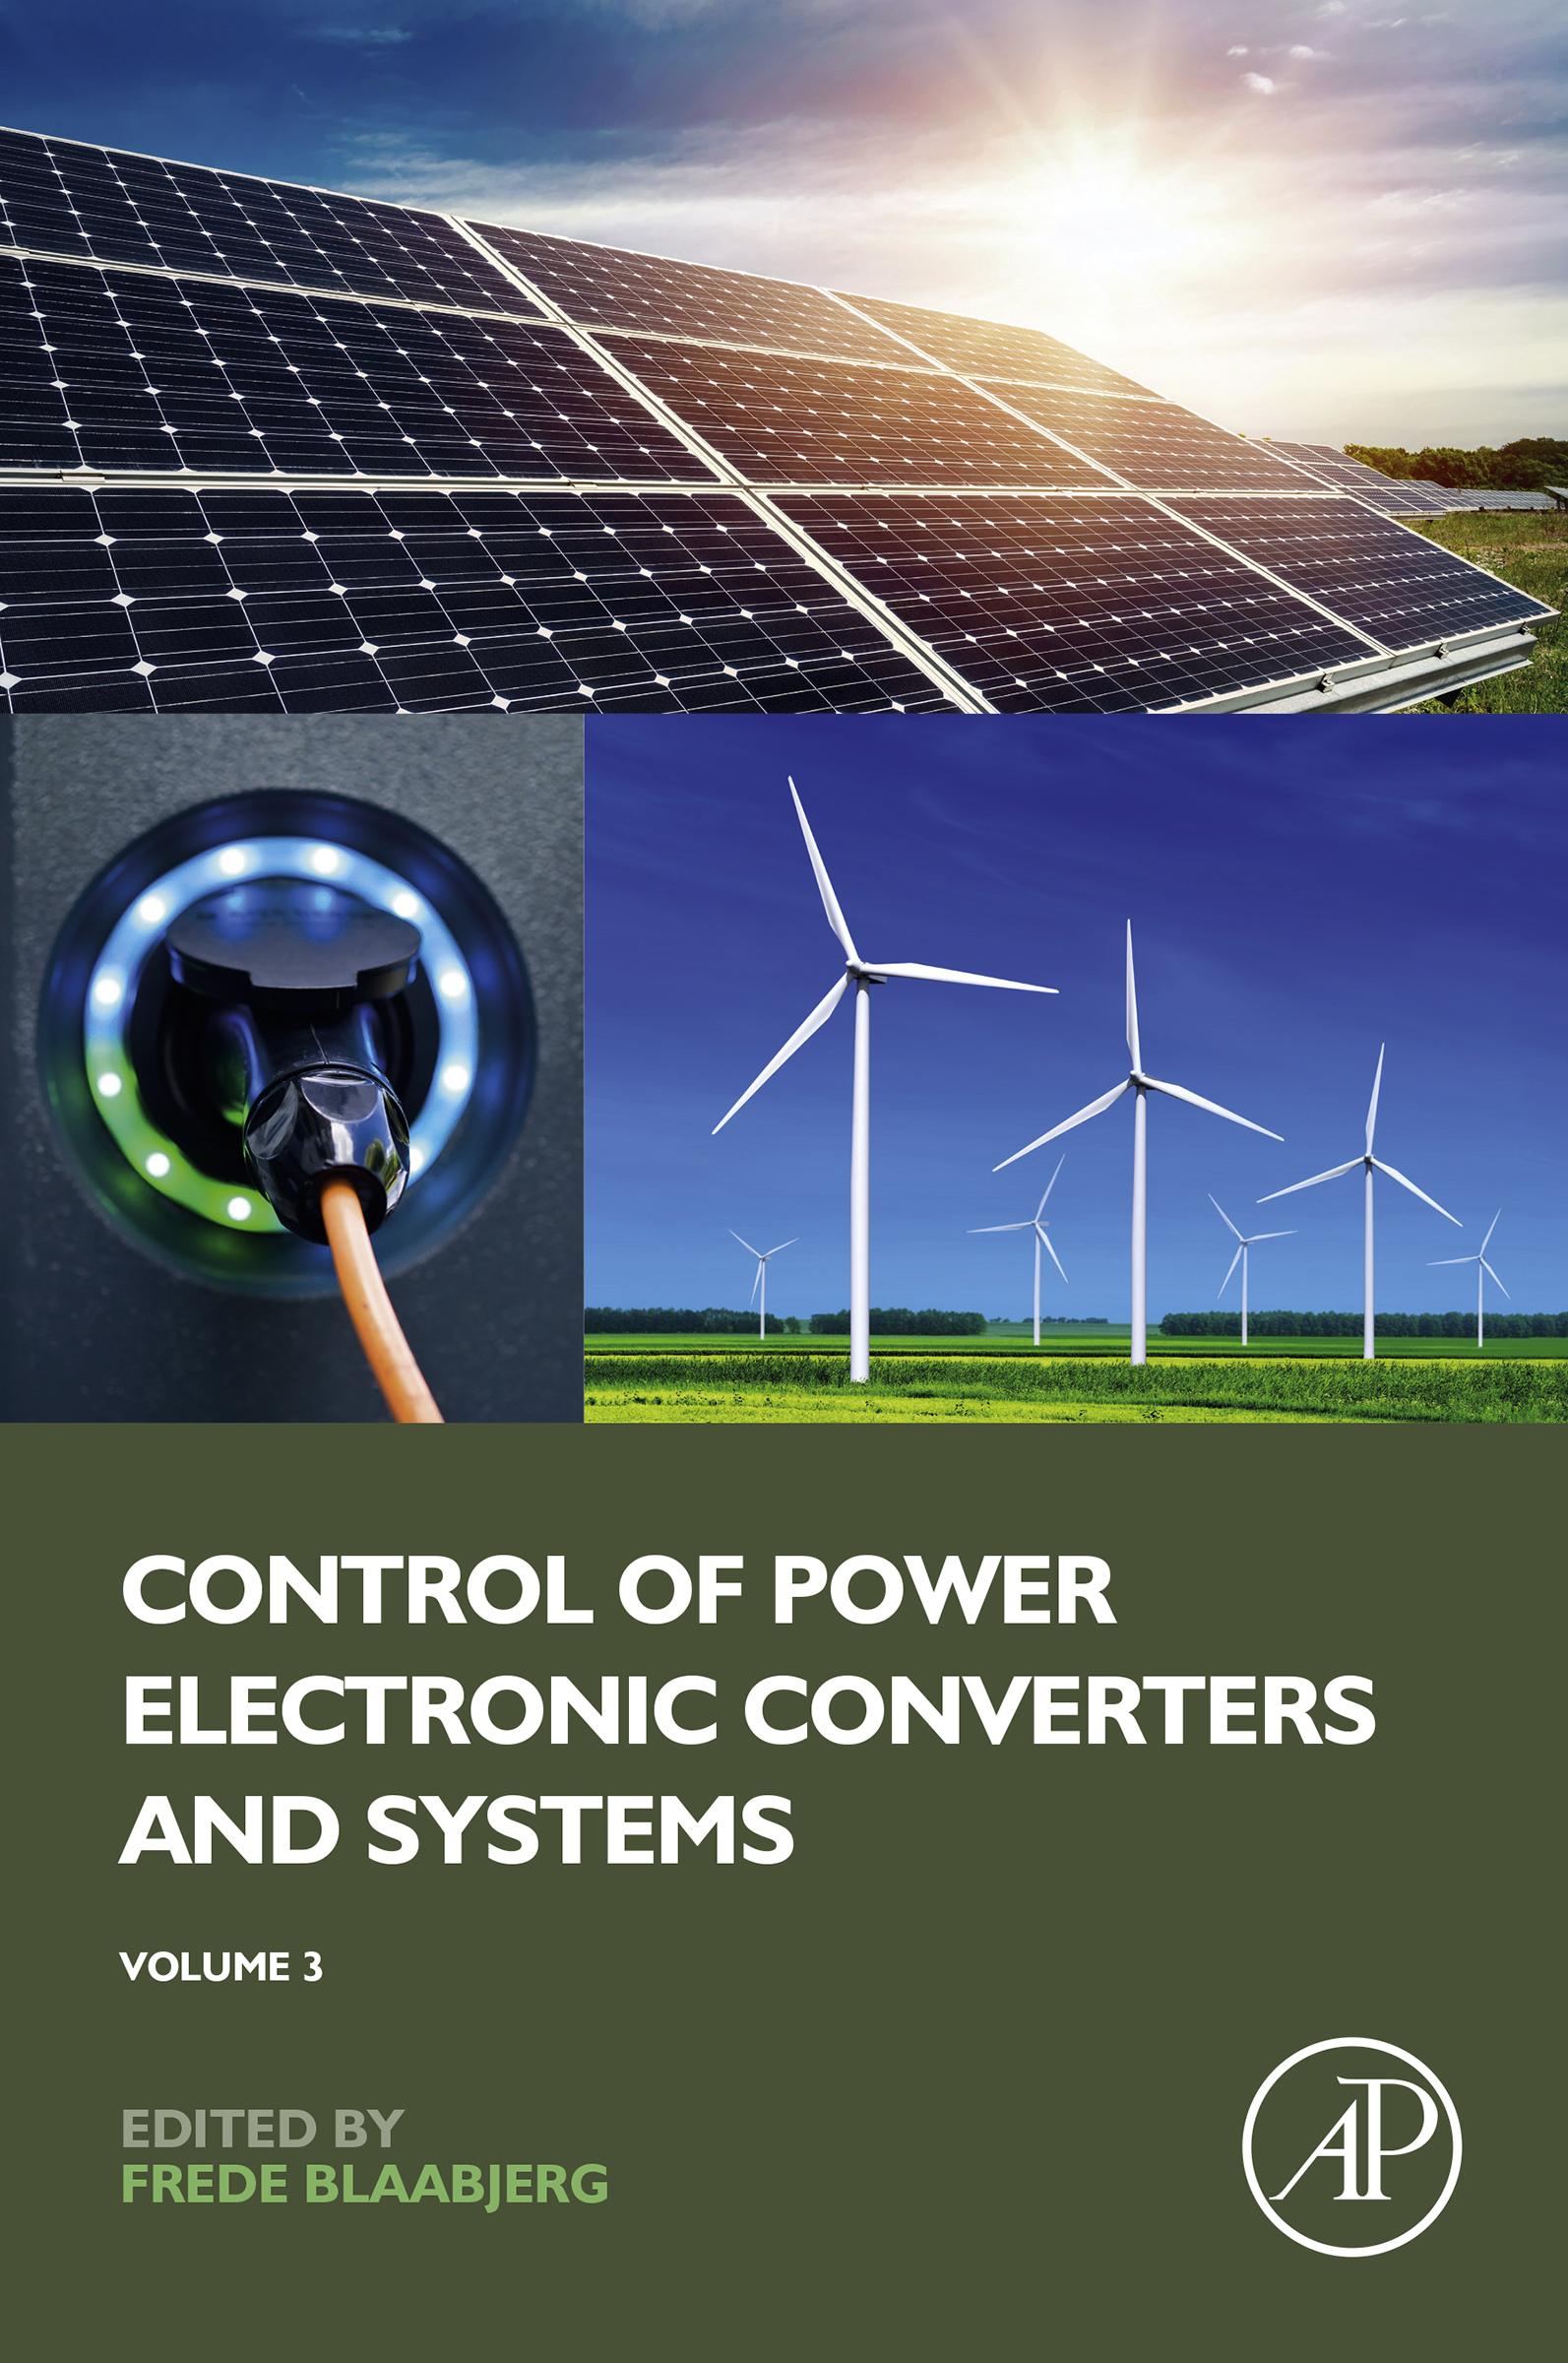 Control of Power Electronic Converters and Systems Volume 3 Editor Frede - photo 1